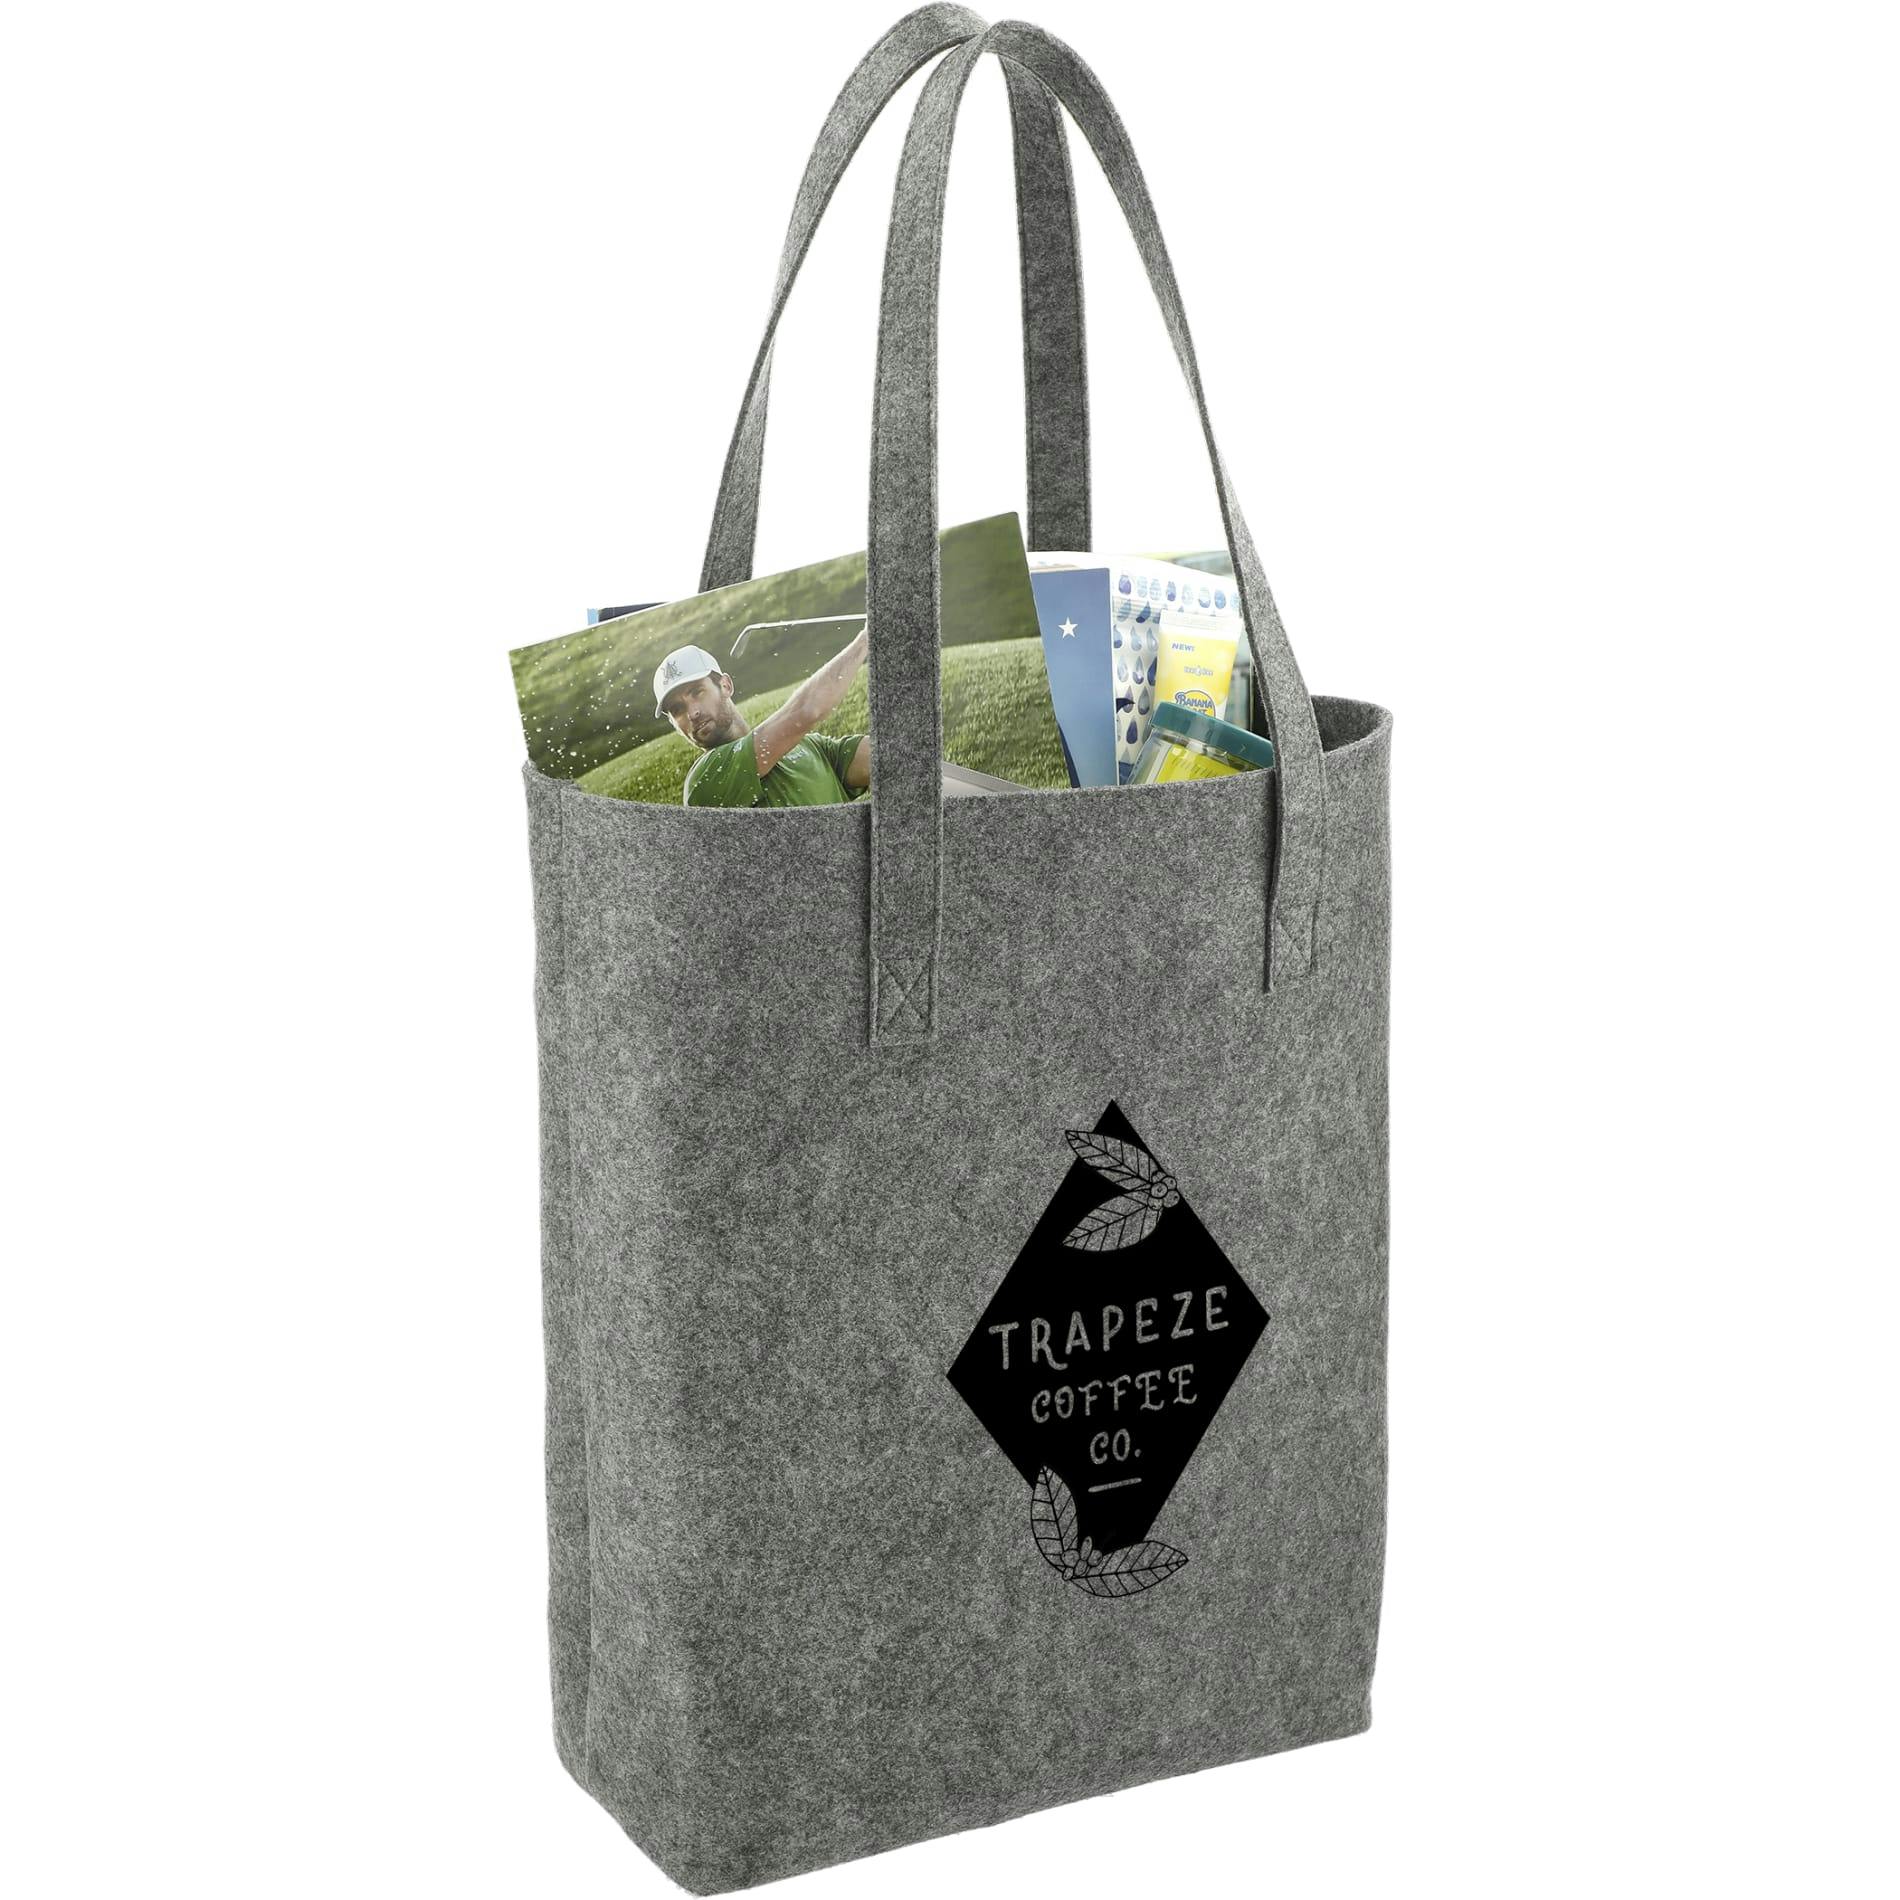 Recycled Felt Shopper Tote - additional Image 1